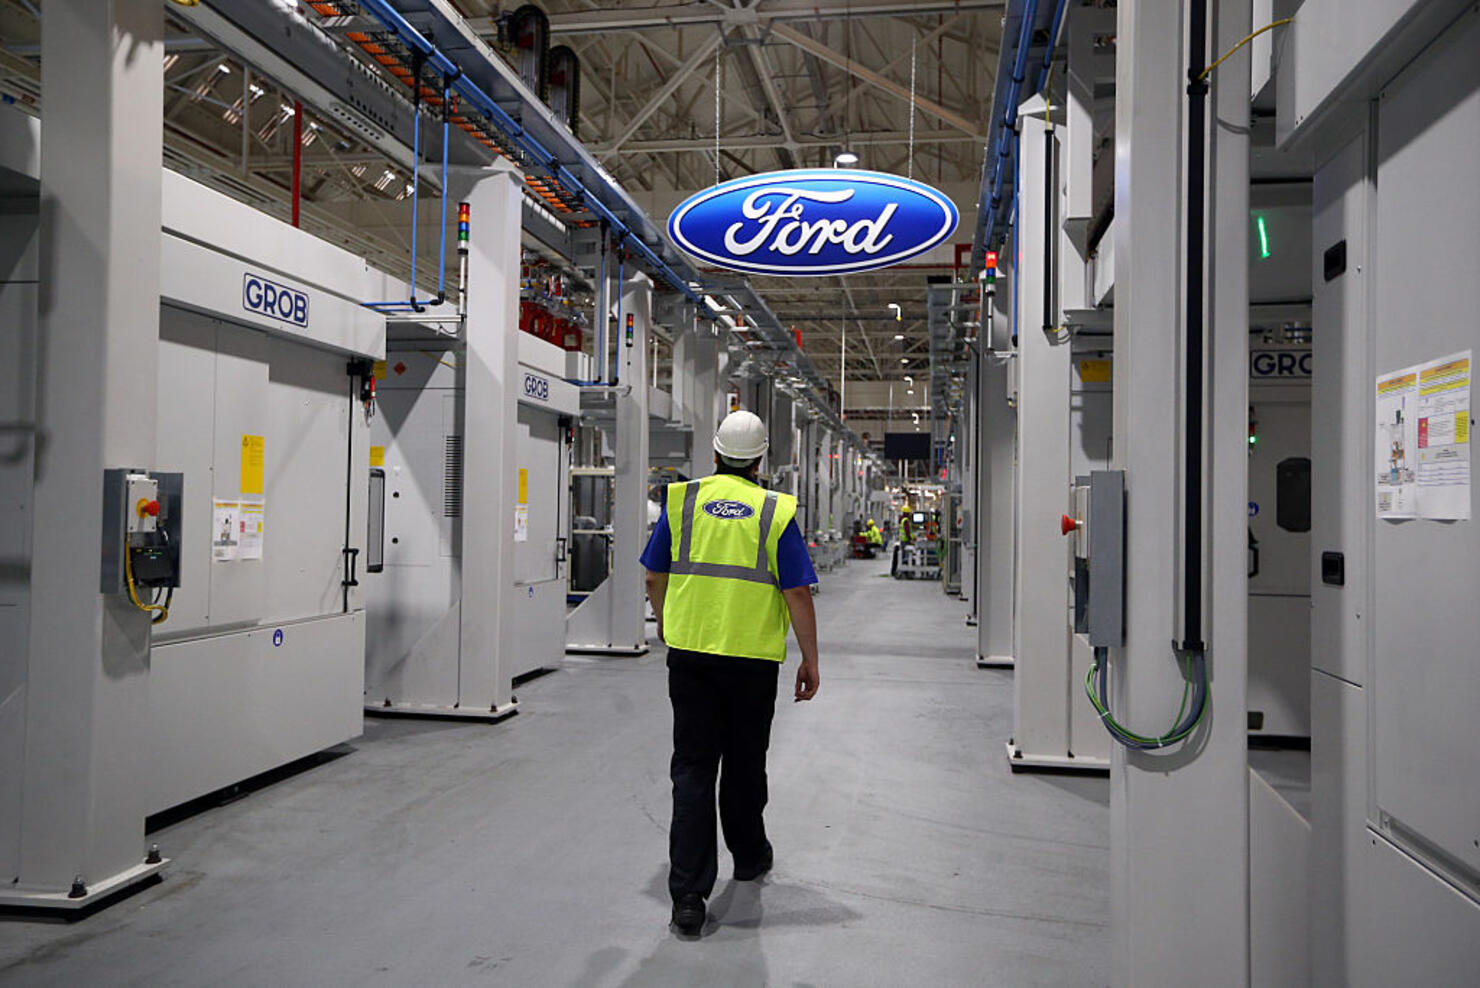 Ford says it will lose $1 billion because of Trump tariffs on steel and aluminum